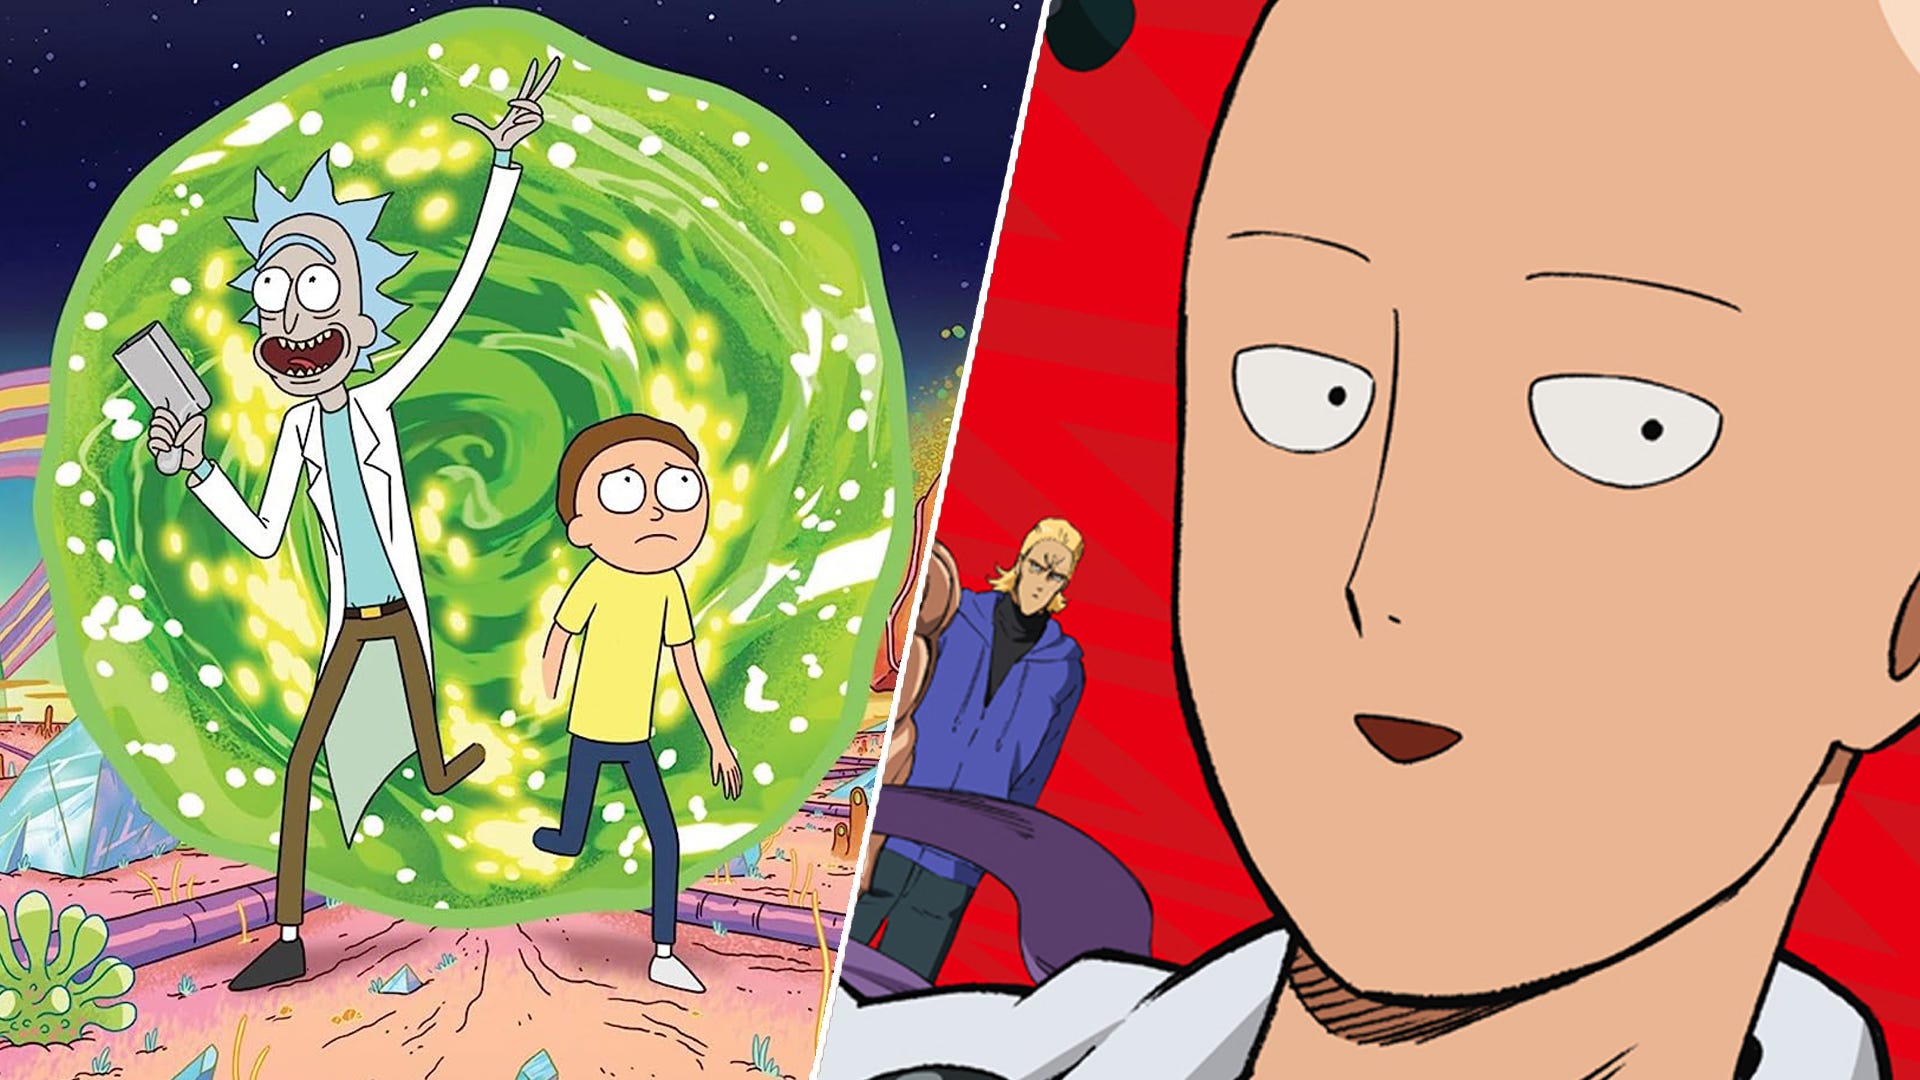 Sony’s live-action One Punch Man movie is getting a rewrite from… Rick and Morty co-creator Dan Harmon?